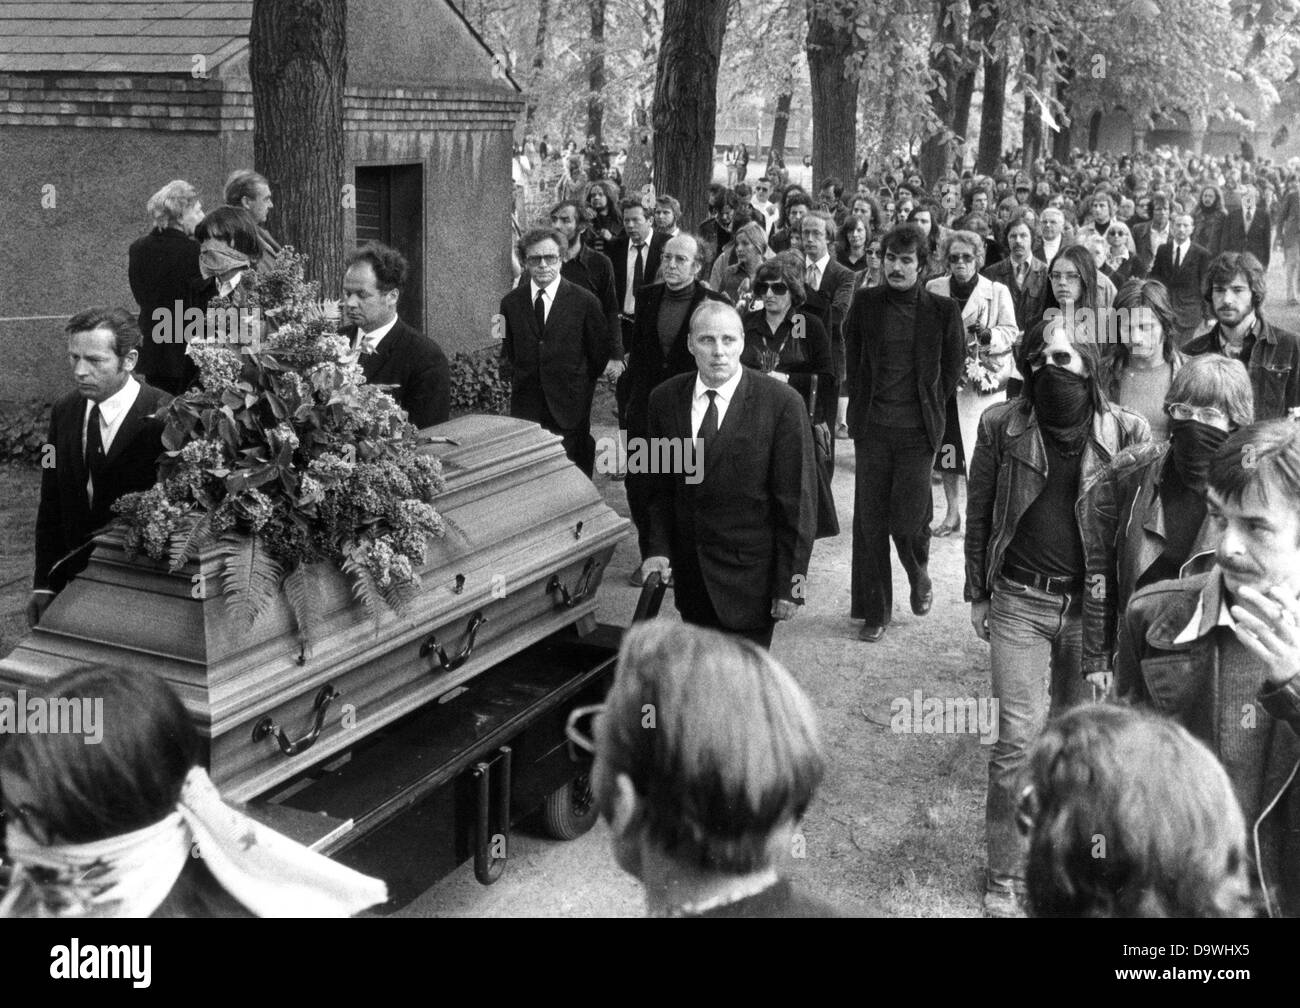 About three and a half thousand participate in the funeral service for Ulrike Meinhof on the 15th of May in 1976. Behind the coffin (1st row, from left) the lawyers Hans-Heinz Heldmann and Klaus Croissant as well as Meinhof's sister Wienke Zitzlaff and her husband. The RAF terrorist Ulrike Meinhof had committed suicide in her cell in Stuttgart-Stammheim on the 5th of May in 1976. Stock Photo